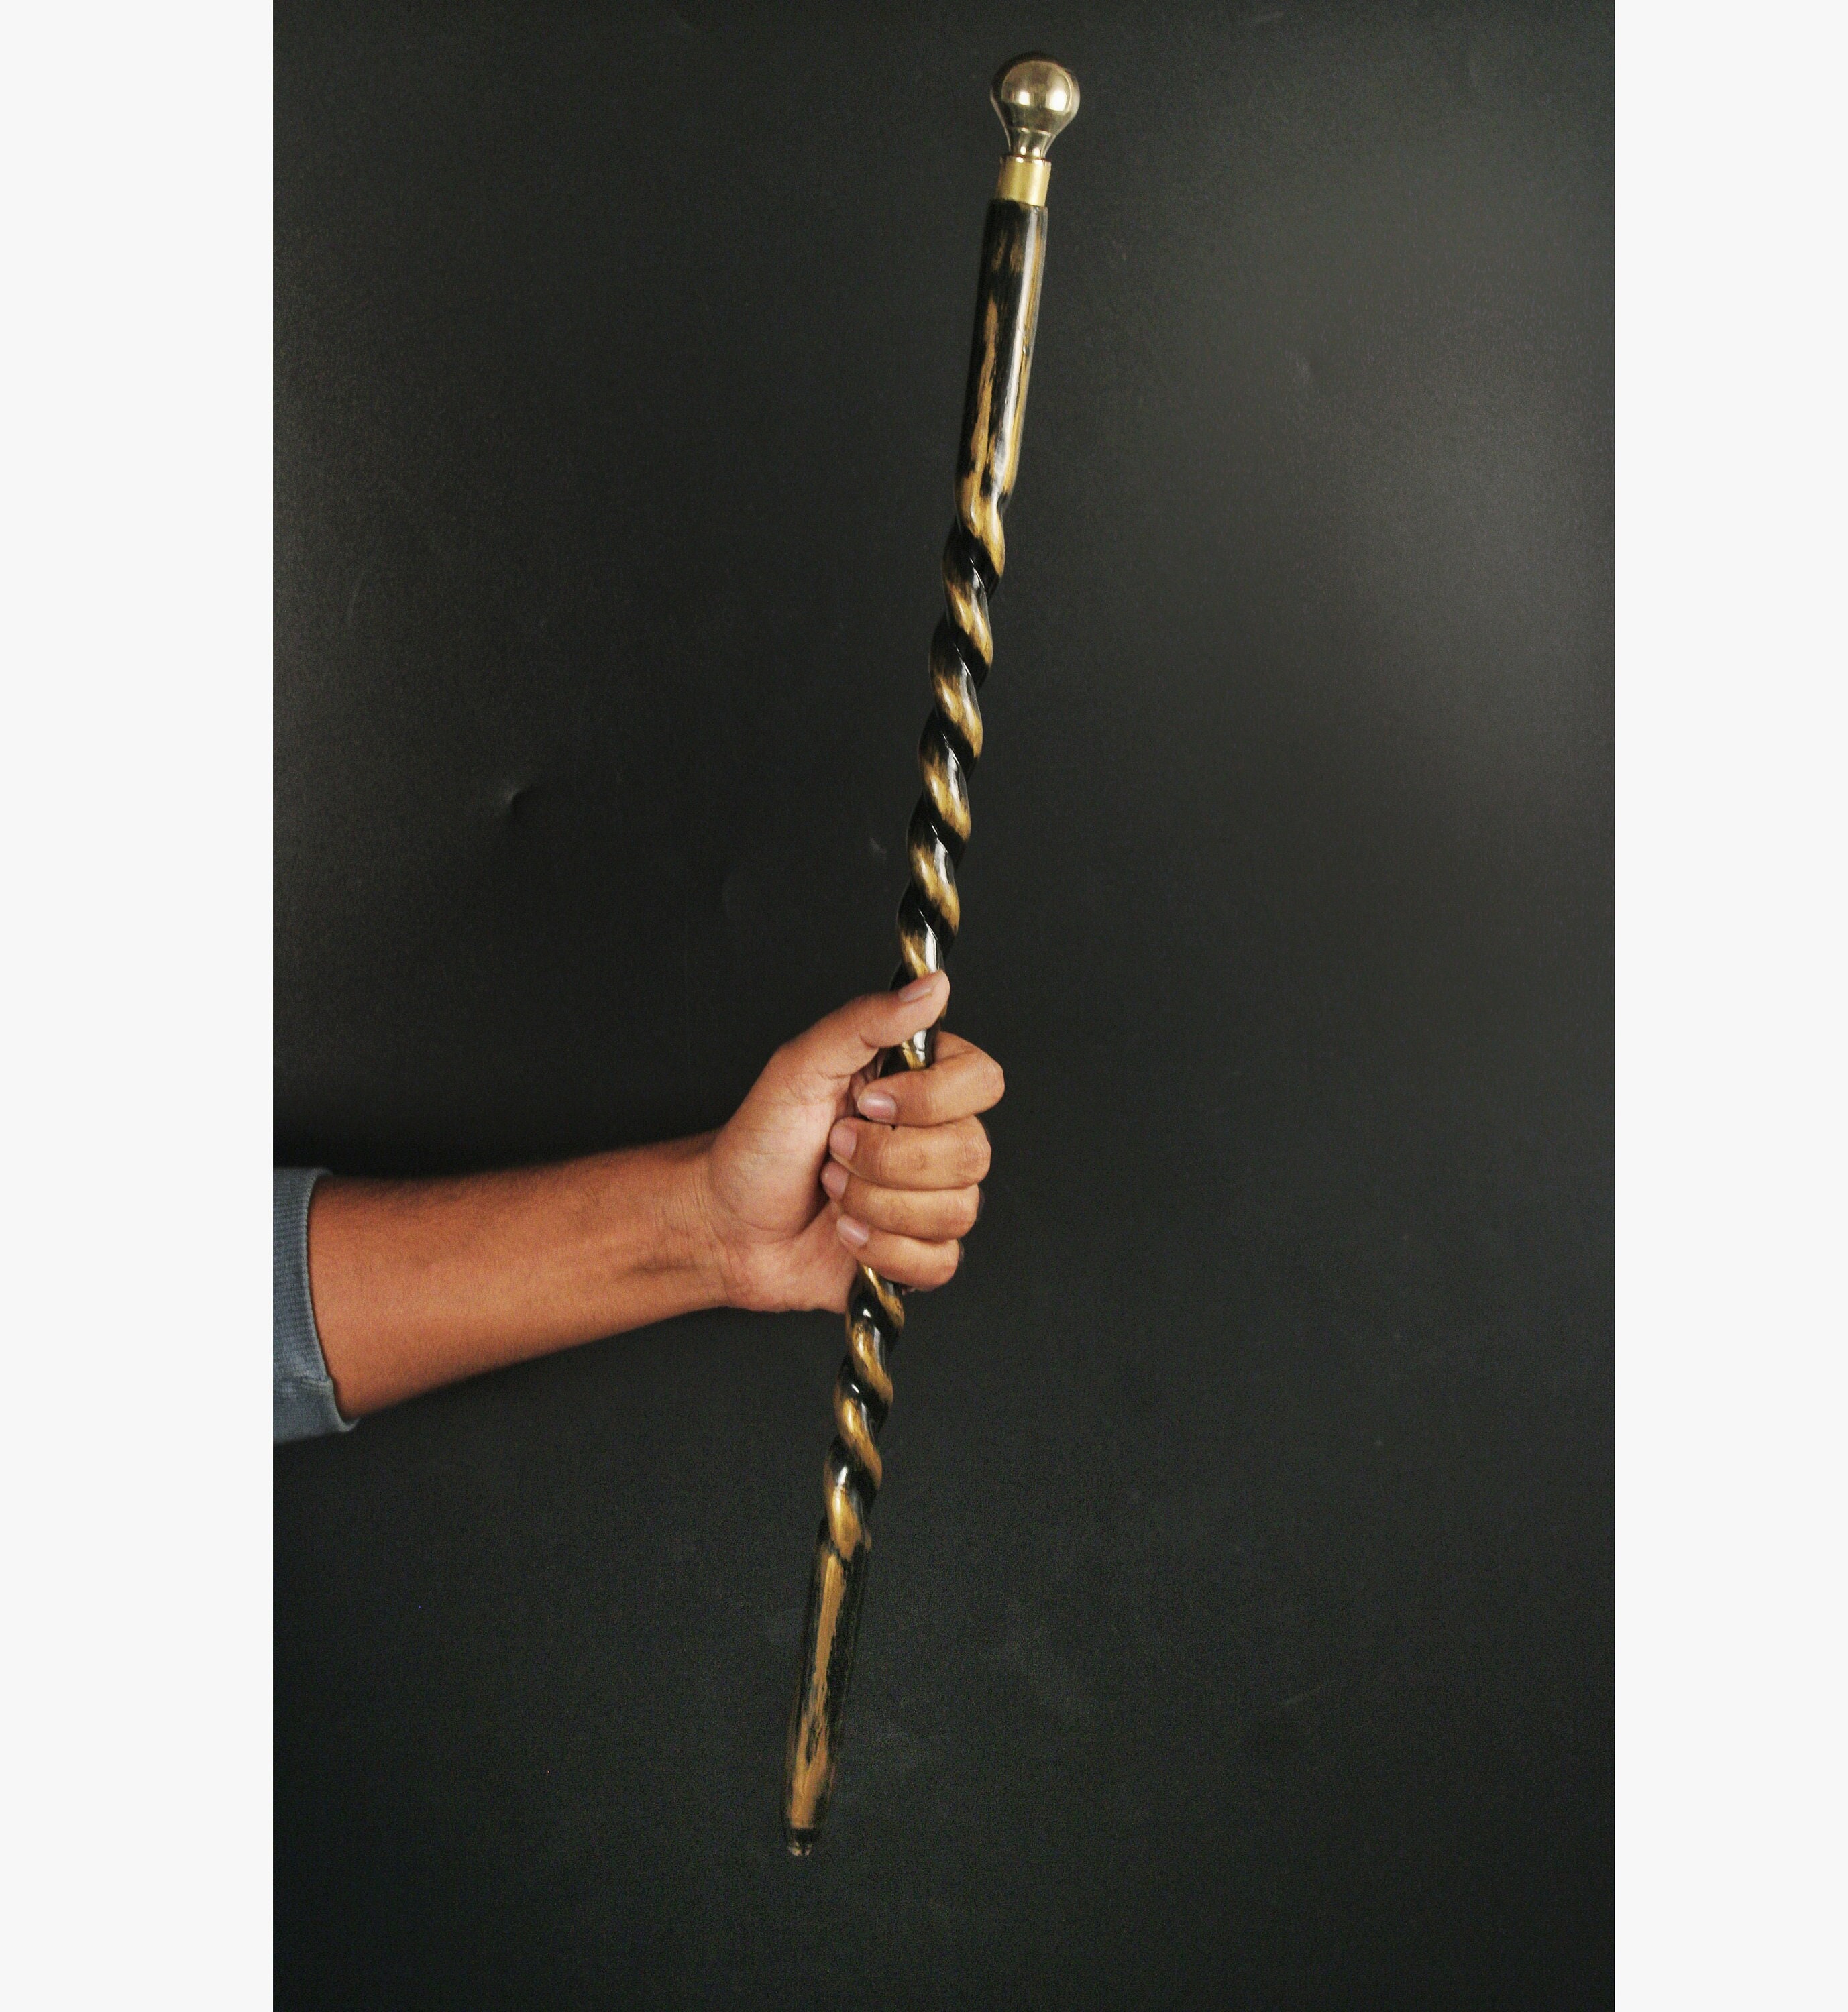 Handcrafted Walking Rule Swagger Wooden Stick Brass Cap on Both end.